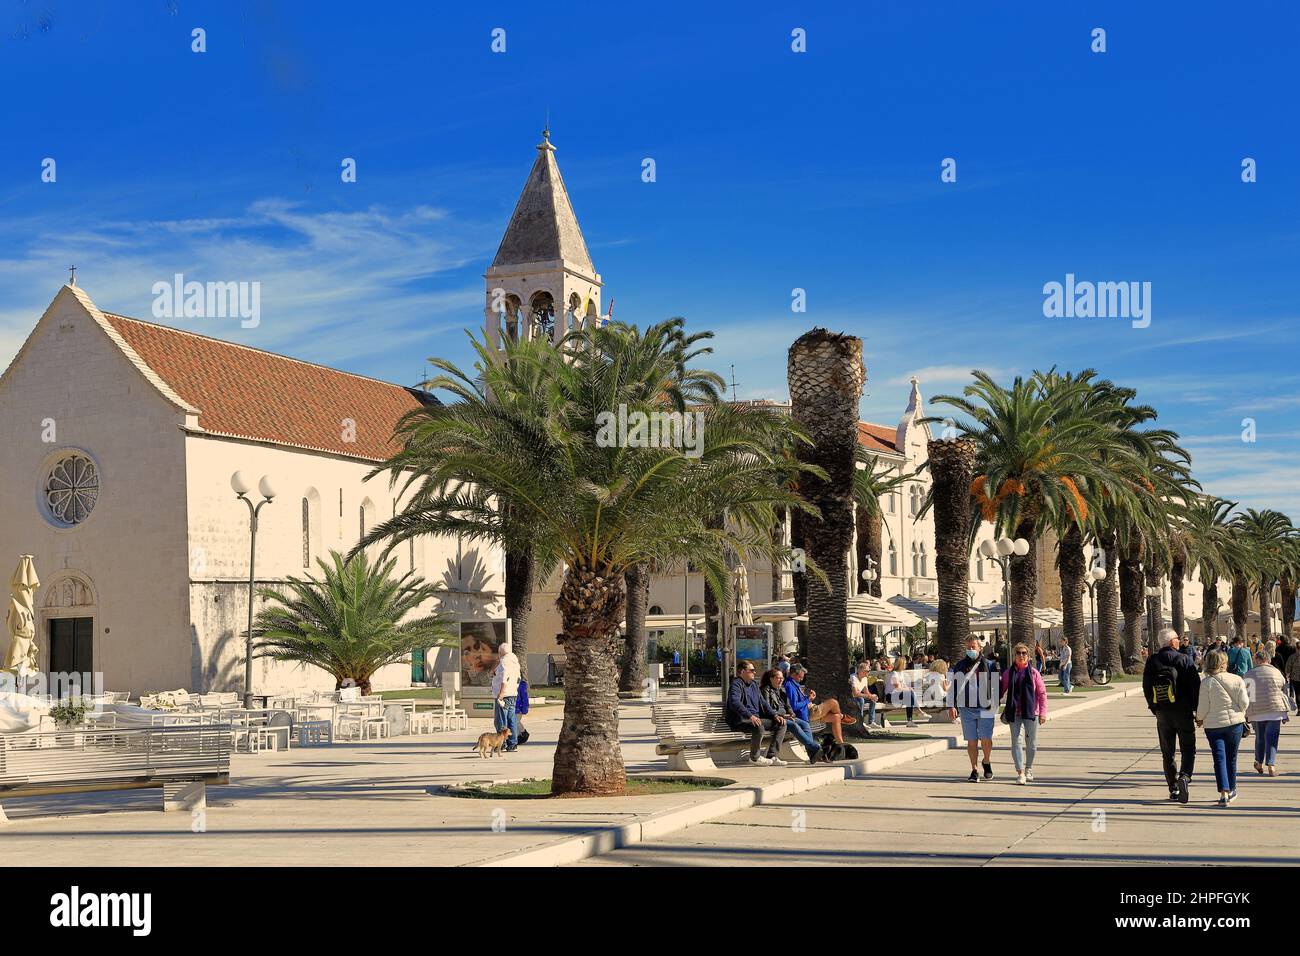 Trogir, Croatia - People walking along the Riva or Promenade in the old town on a sunny day Stock Photo